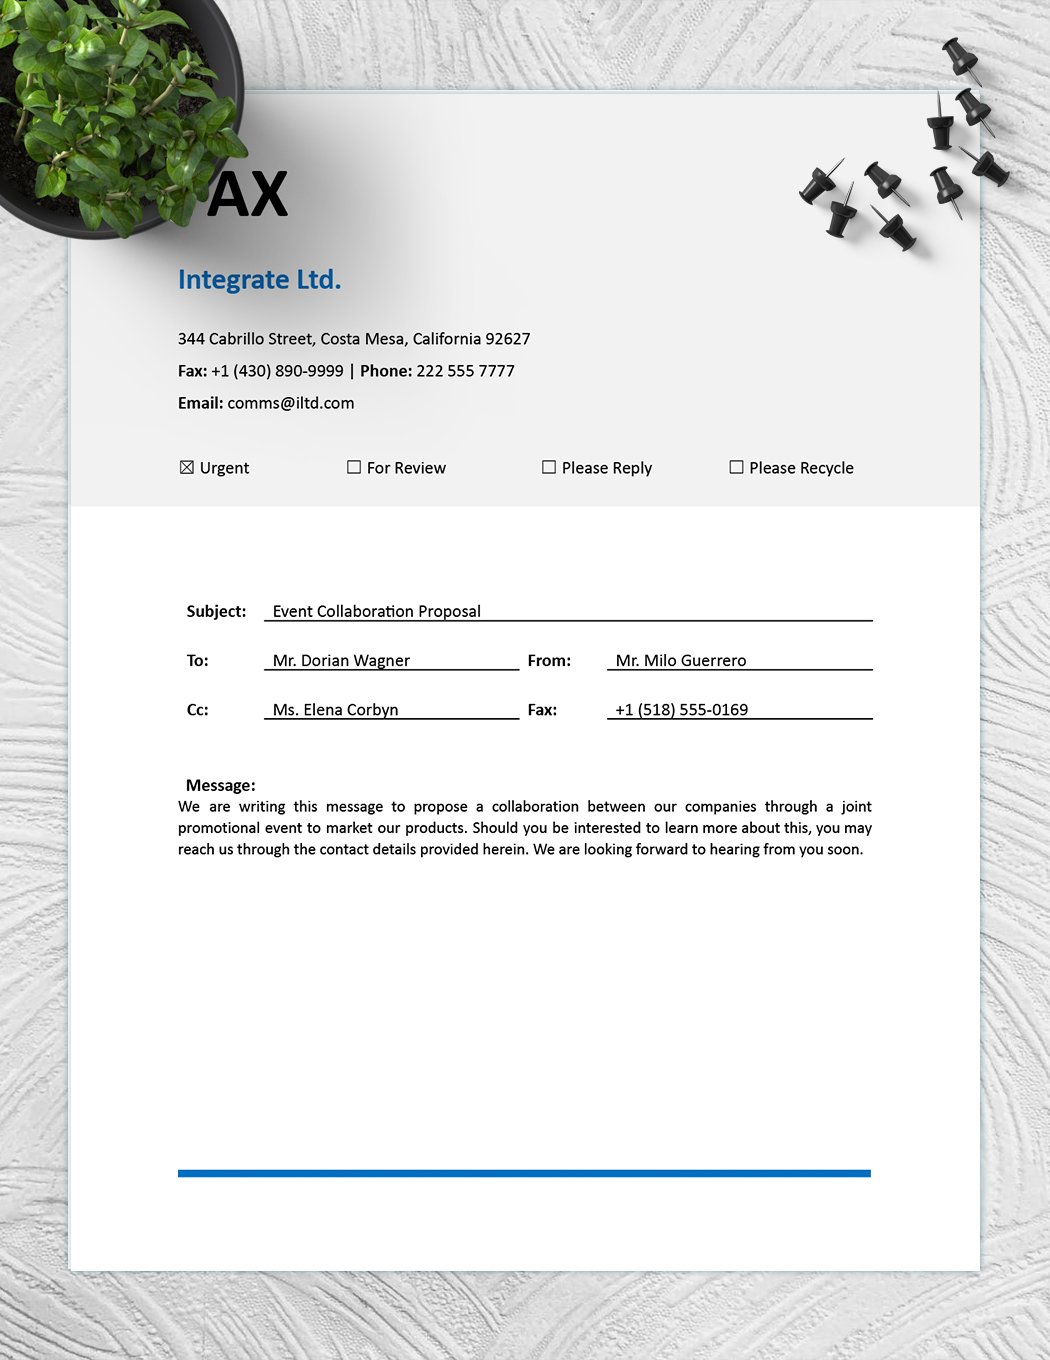 Marketing Fax Cover Sheet Template